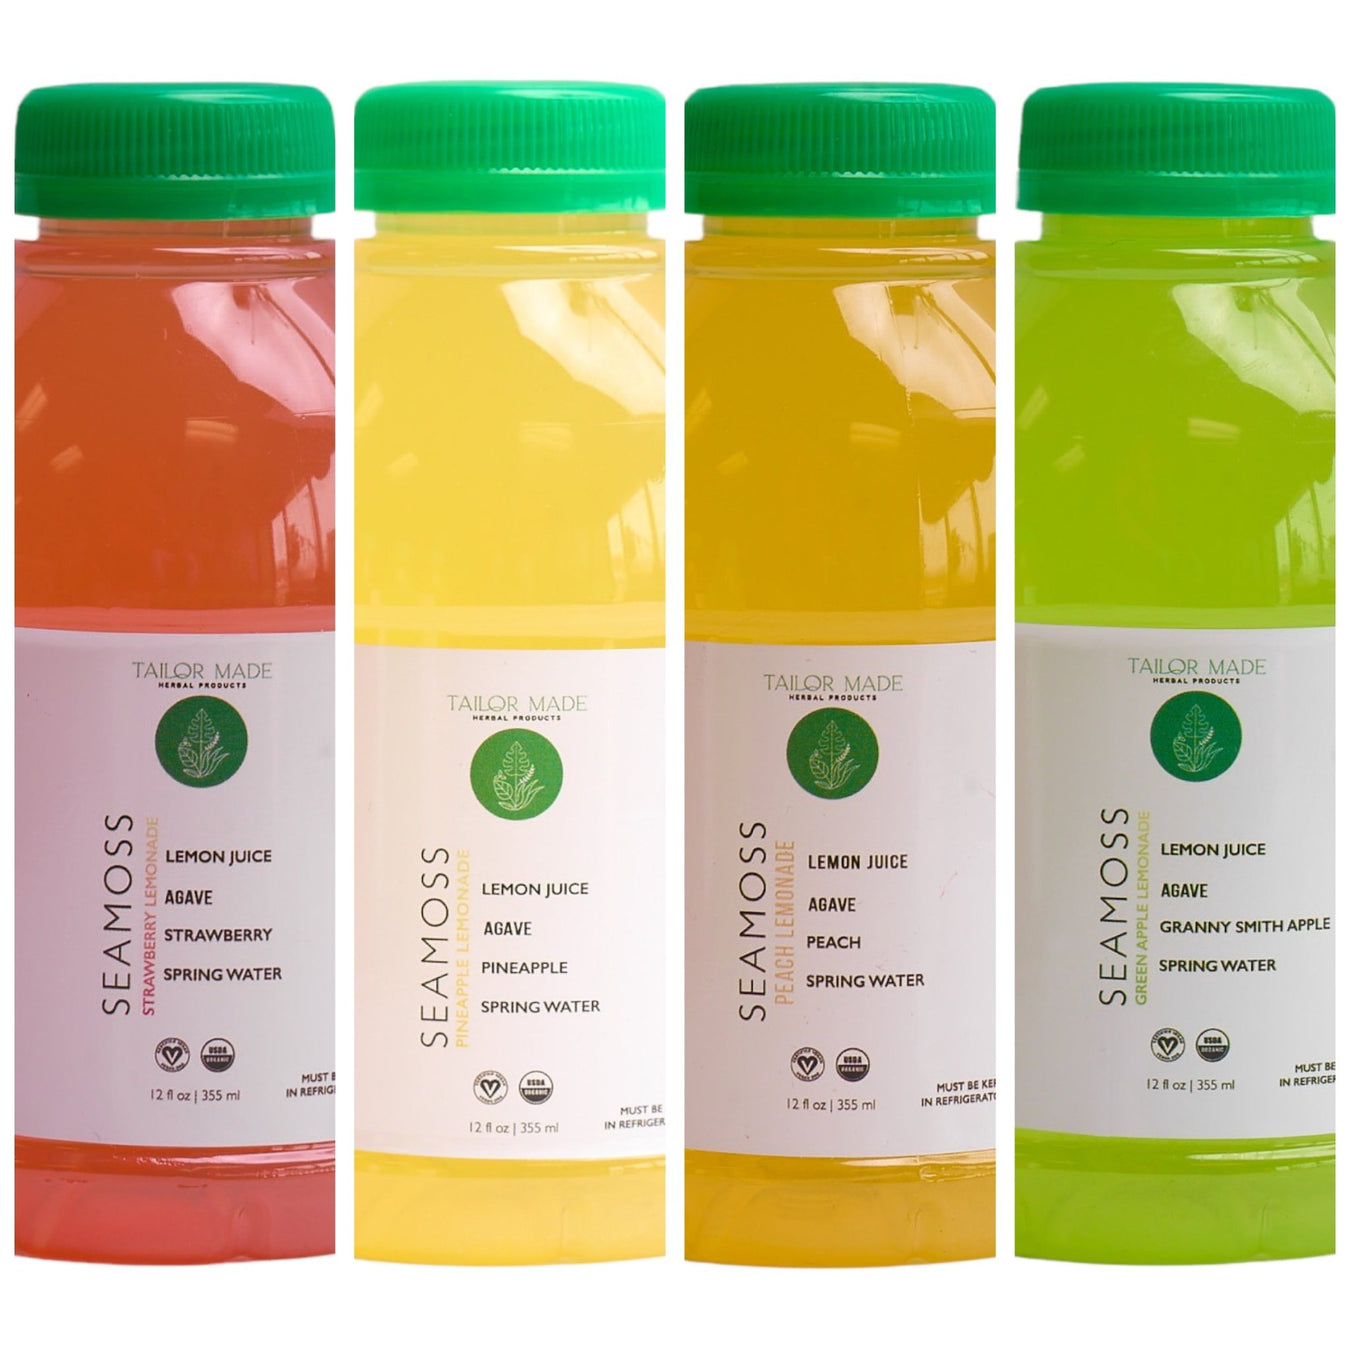 SEAMOSS FRUIT DRINKS - Tailor Made Herbal Products